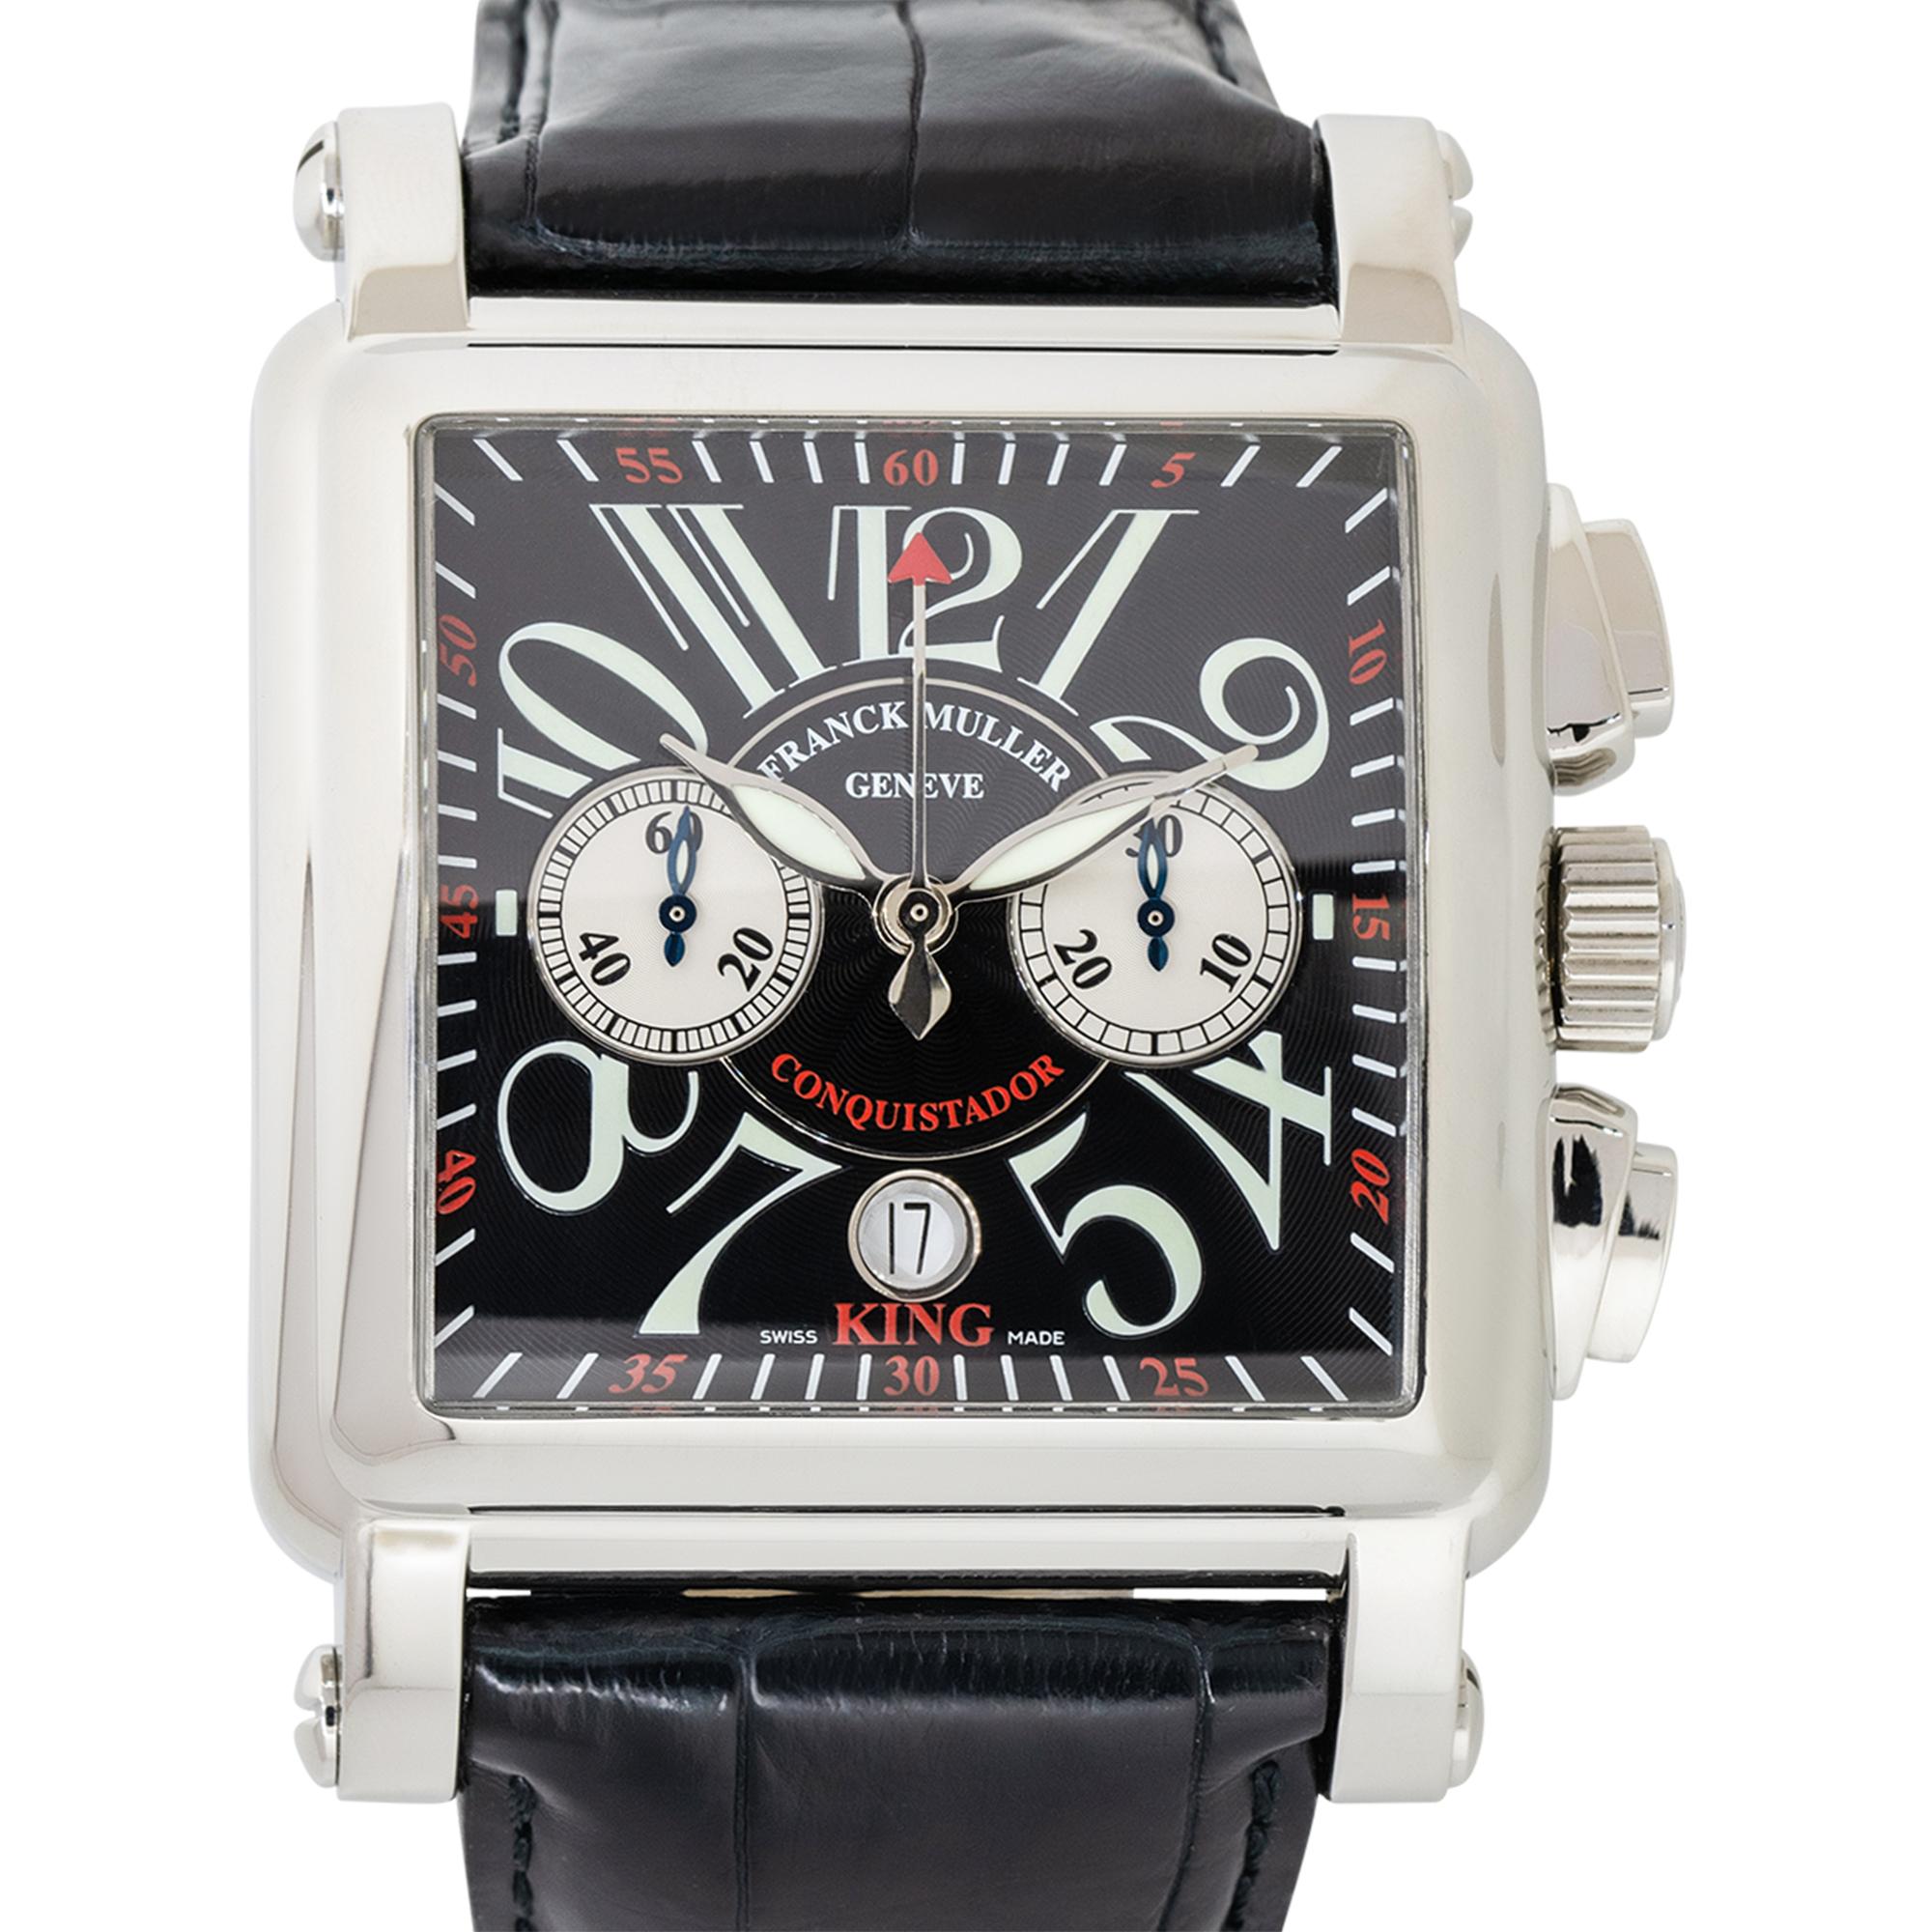 Brand: Franck Muller
MPN: 10000
Model: Conquistador Cortez
Case Material: Stainless Steel
Case Diameter: 45 mm
Crystal: Scratch resistant sapphire
Bezel: Stainless Steel
Dial: Black dial with white arabic numerals and two sub dials. Date can be